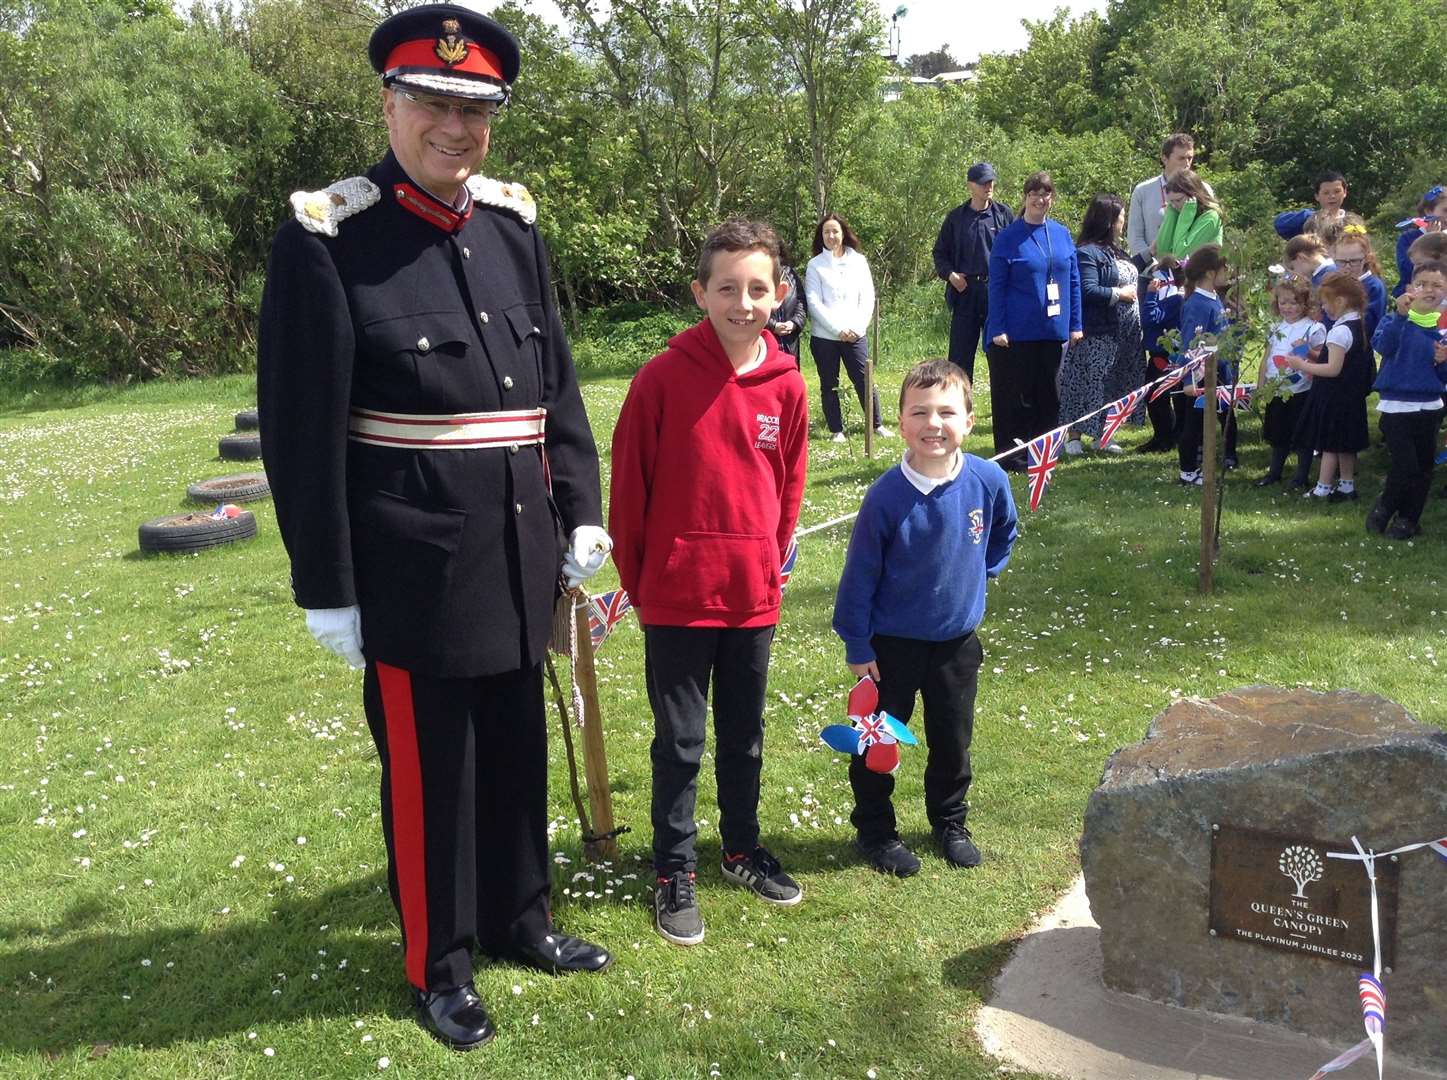 A commemorative plaque was unveiled by Lord Lieutenant of Banffshire Andrew Simpson with oldest pupil Iain MacDougall and youngest pupil Jake Ironside.